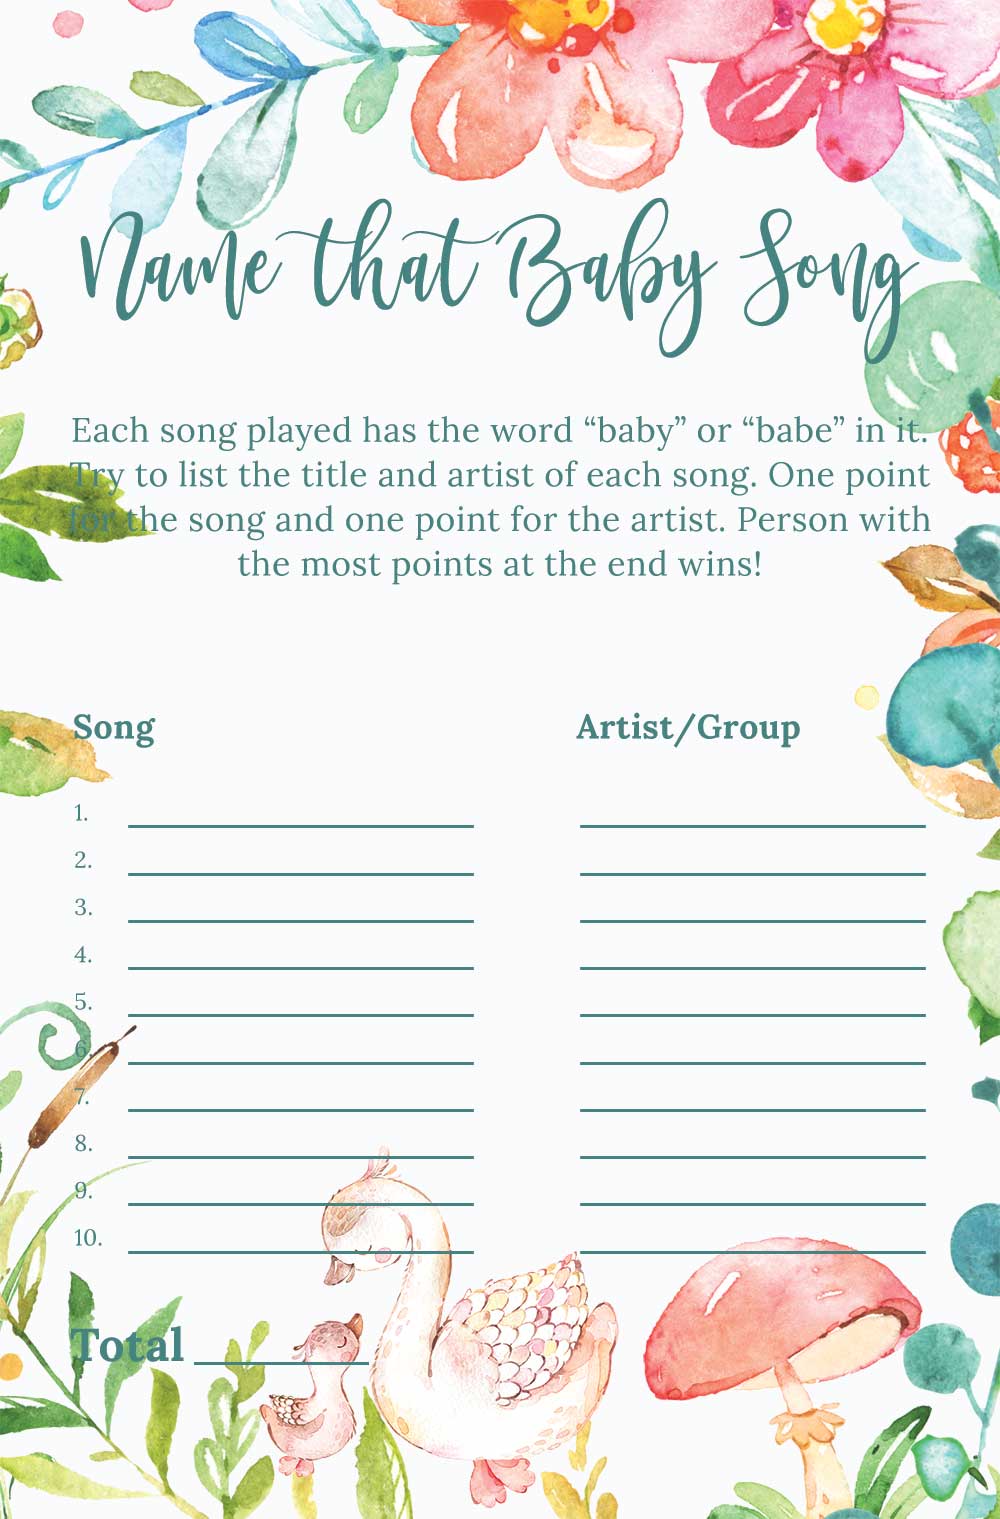 Name that baby song game - Raspberry Theme